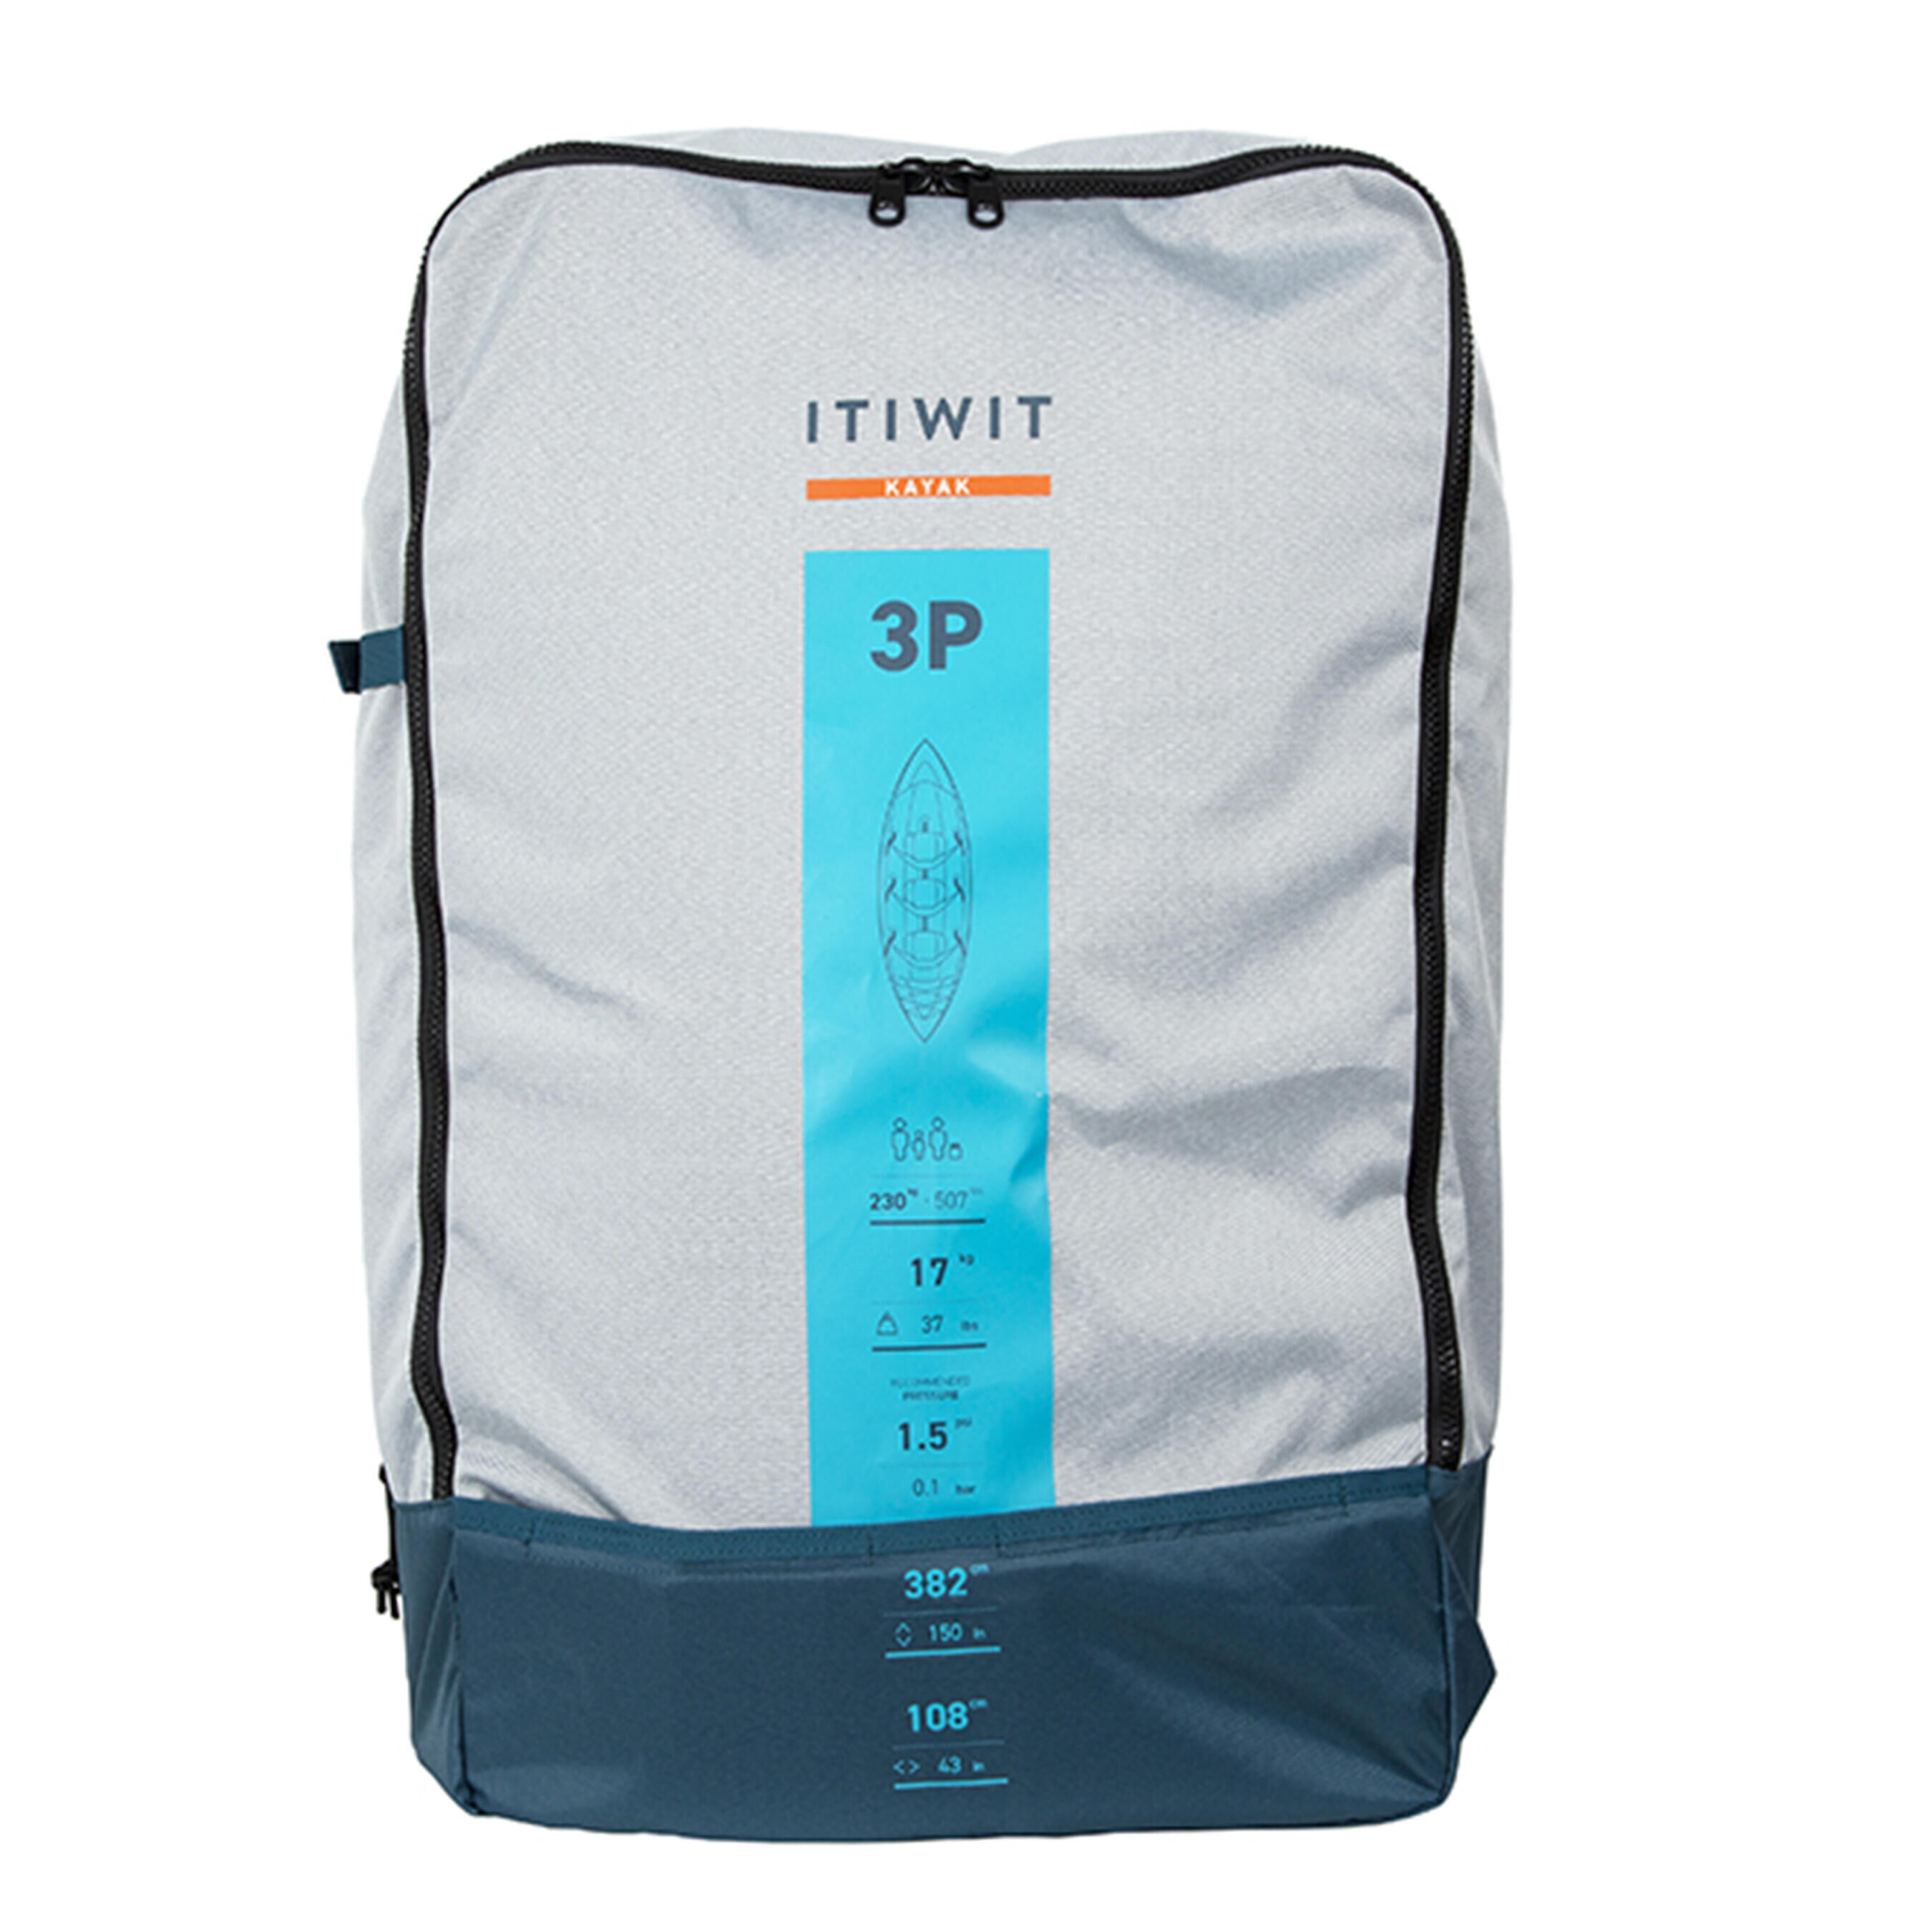 ITIWIT Carry backpack for Itiwit 100 1P, 2P or 3P kayaks